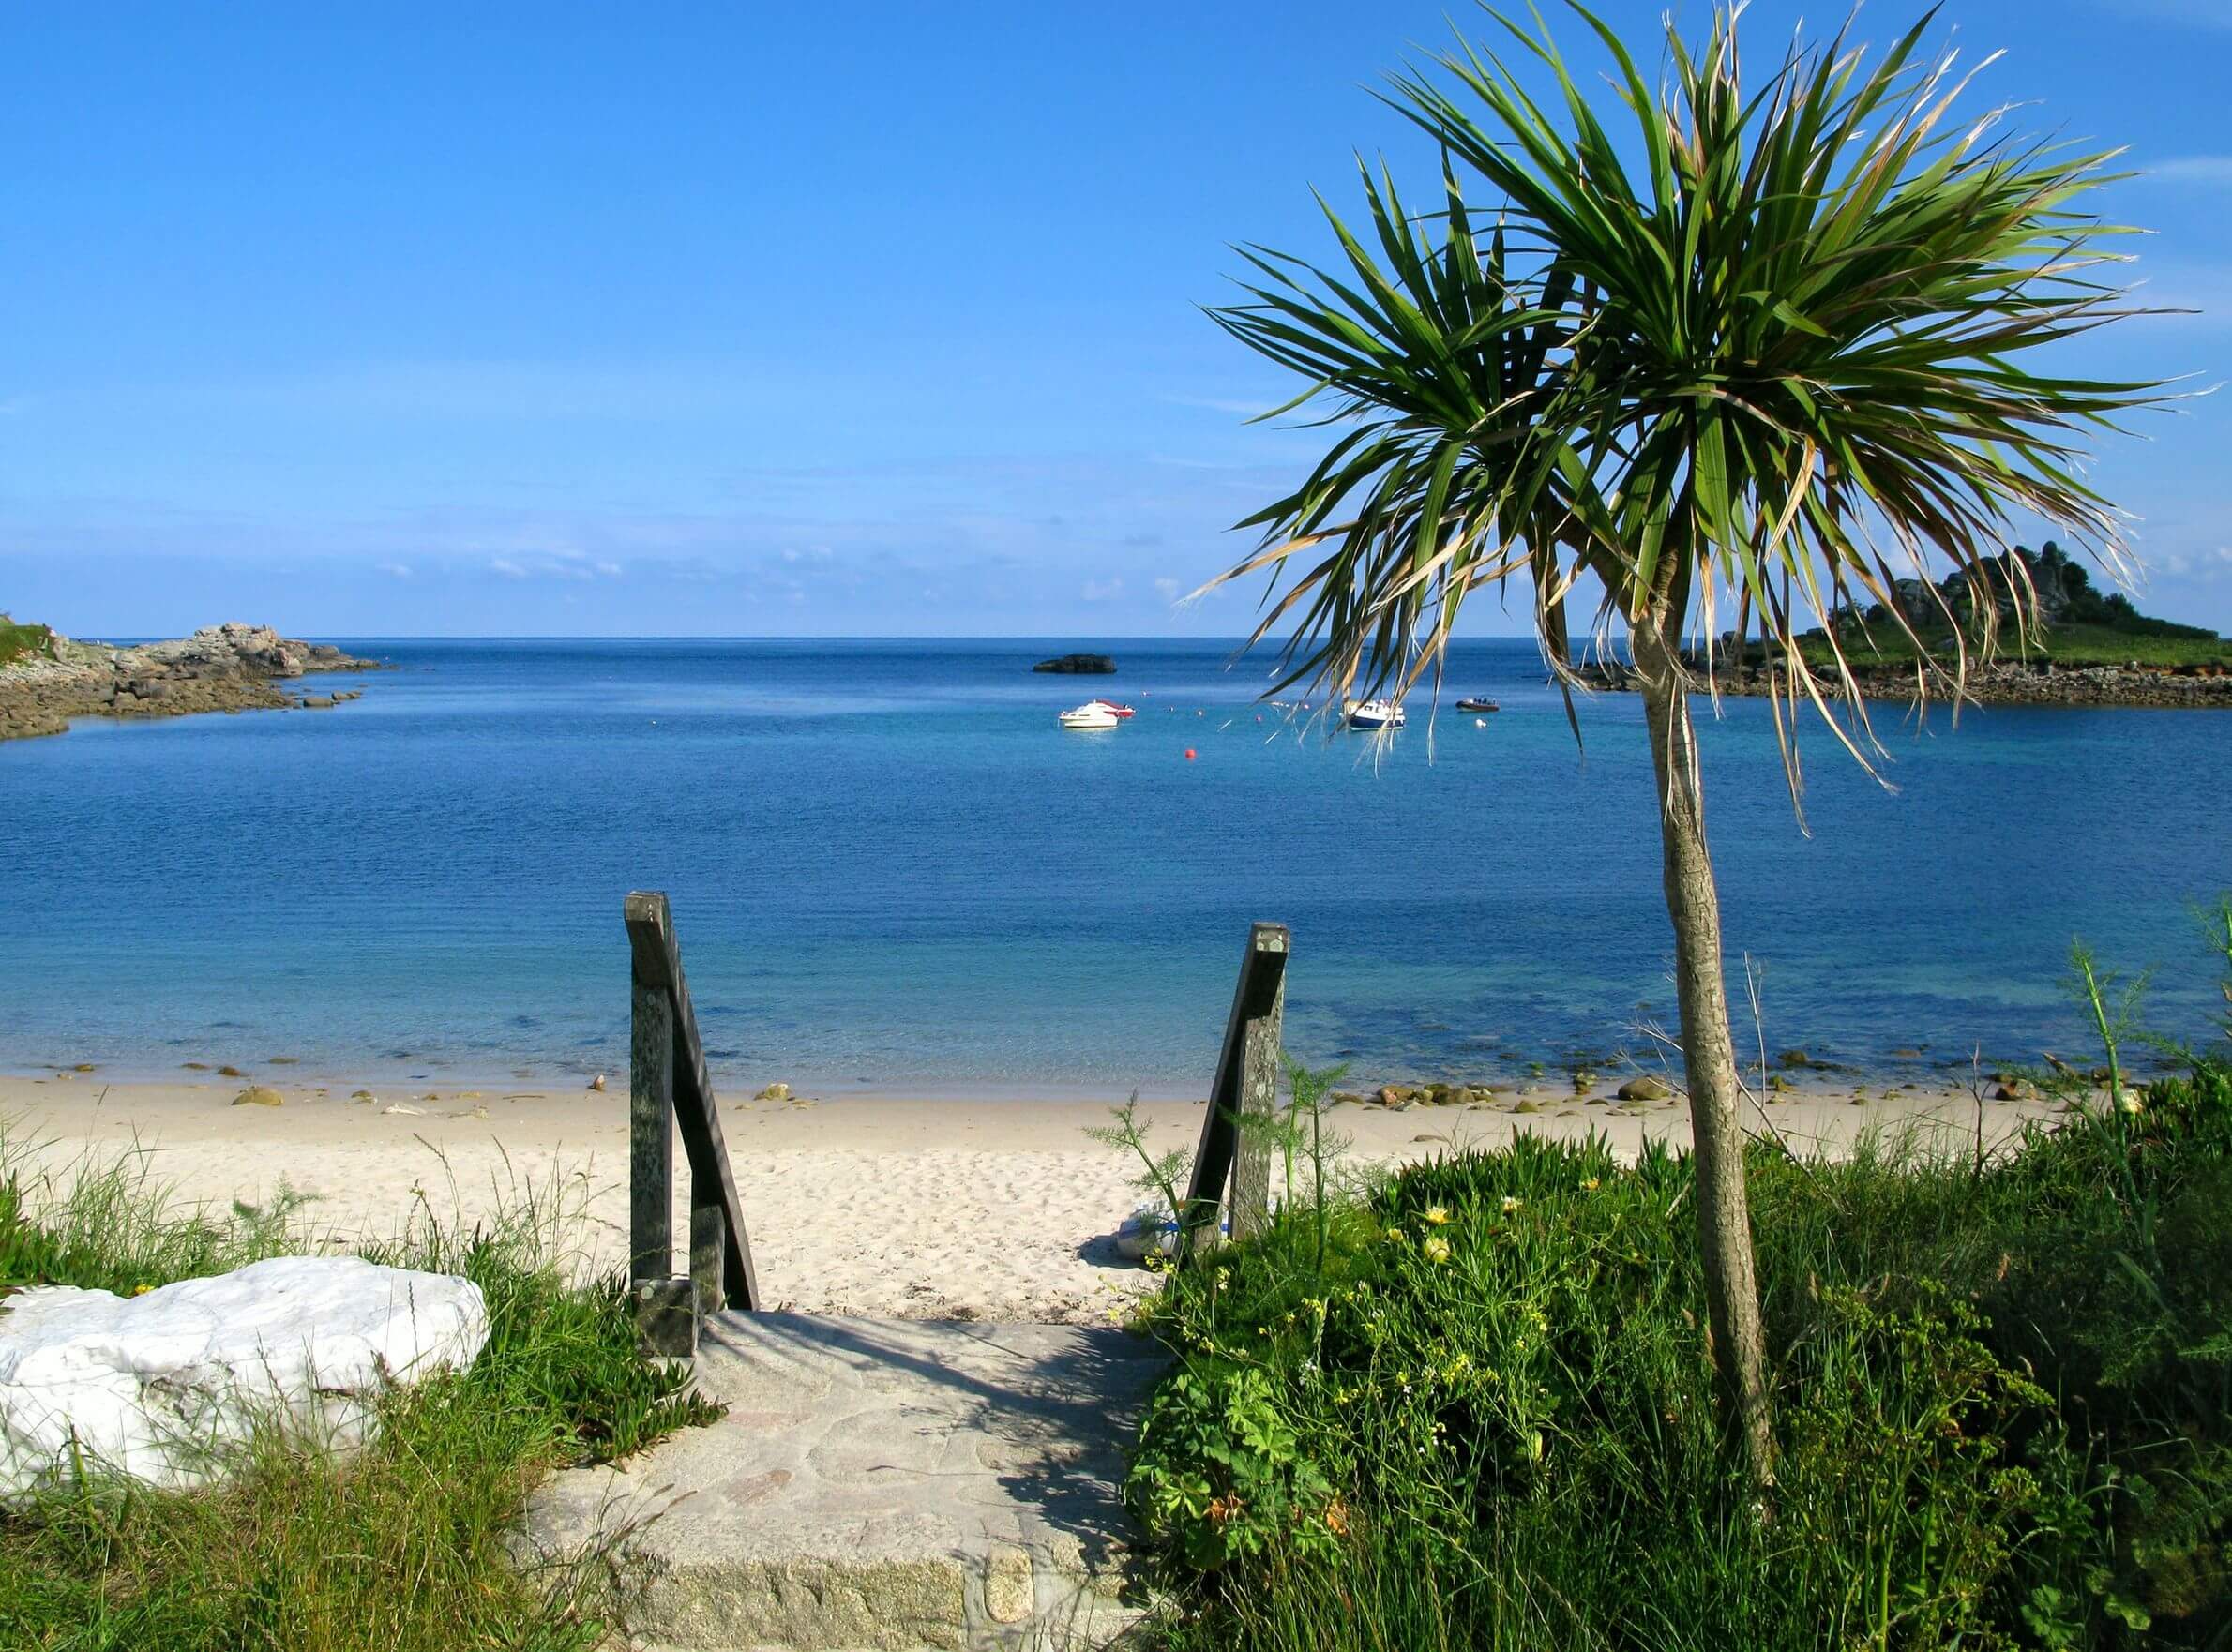 How To Do a Fun Day Trip to The Scilly Isles (+ What to Do There)